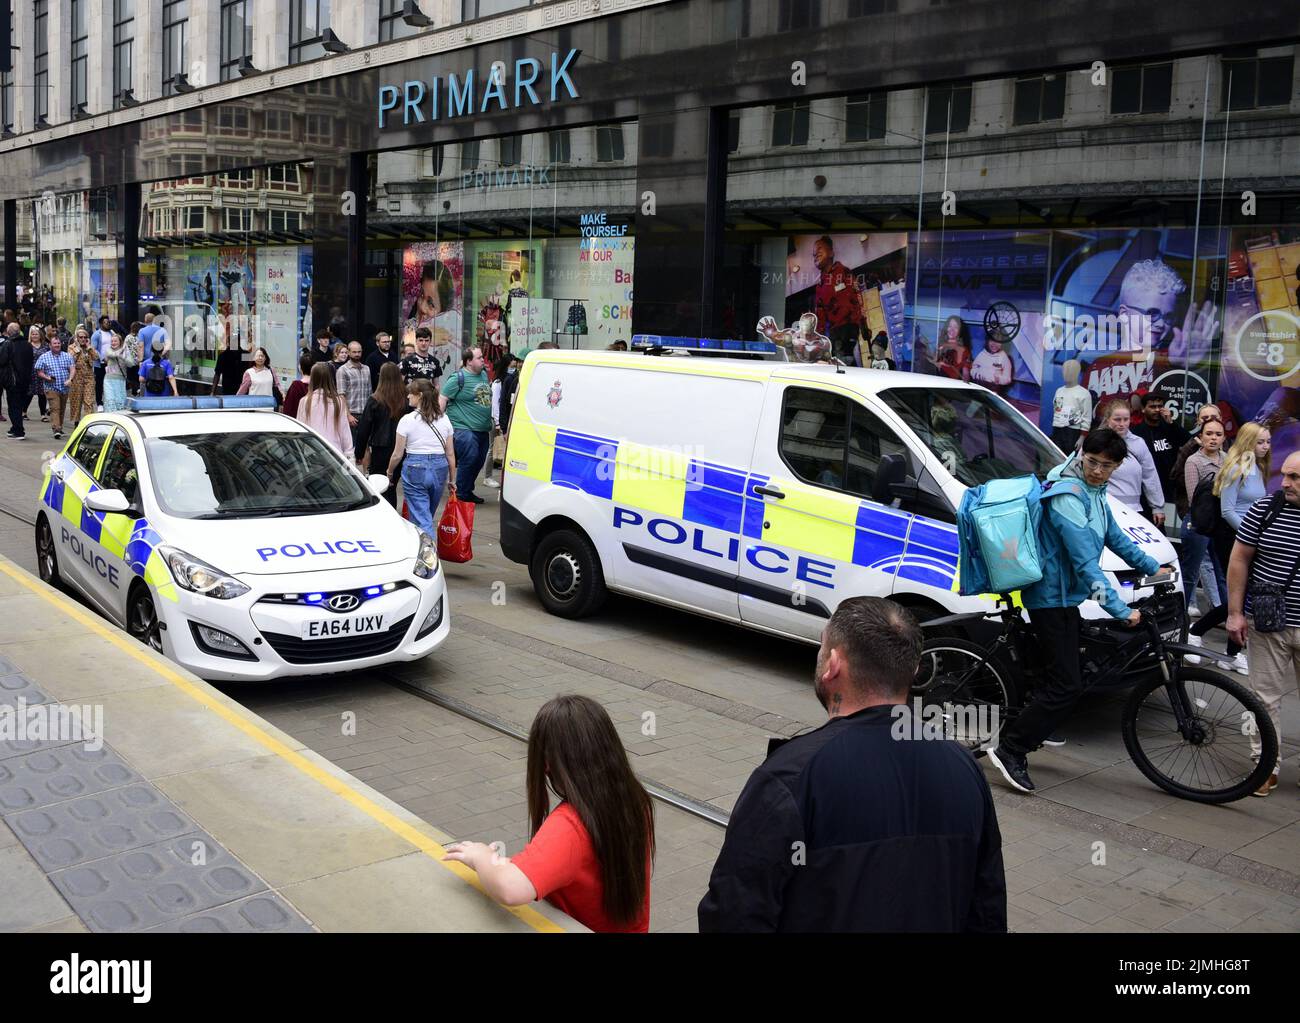 Manchester, UK, 6th August, 2022. Police vehicles on the pavement and the Metrolink tram track at a police incident next to the Primark store in central Manchester, England, United Kingdom, British Isles. Credit: Terry Waller/Alamy Live News Stock Photo